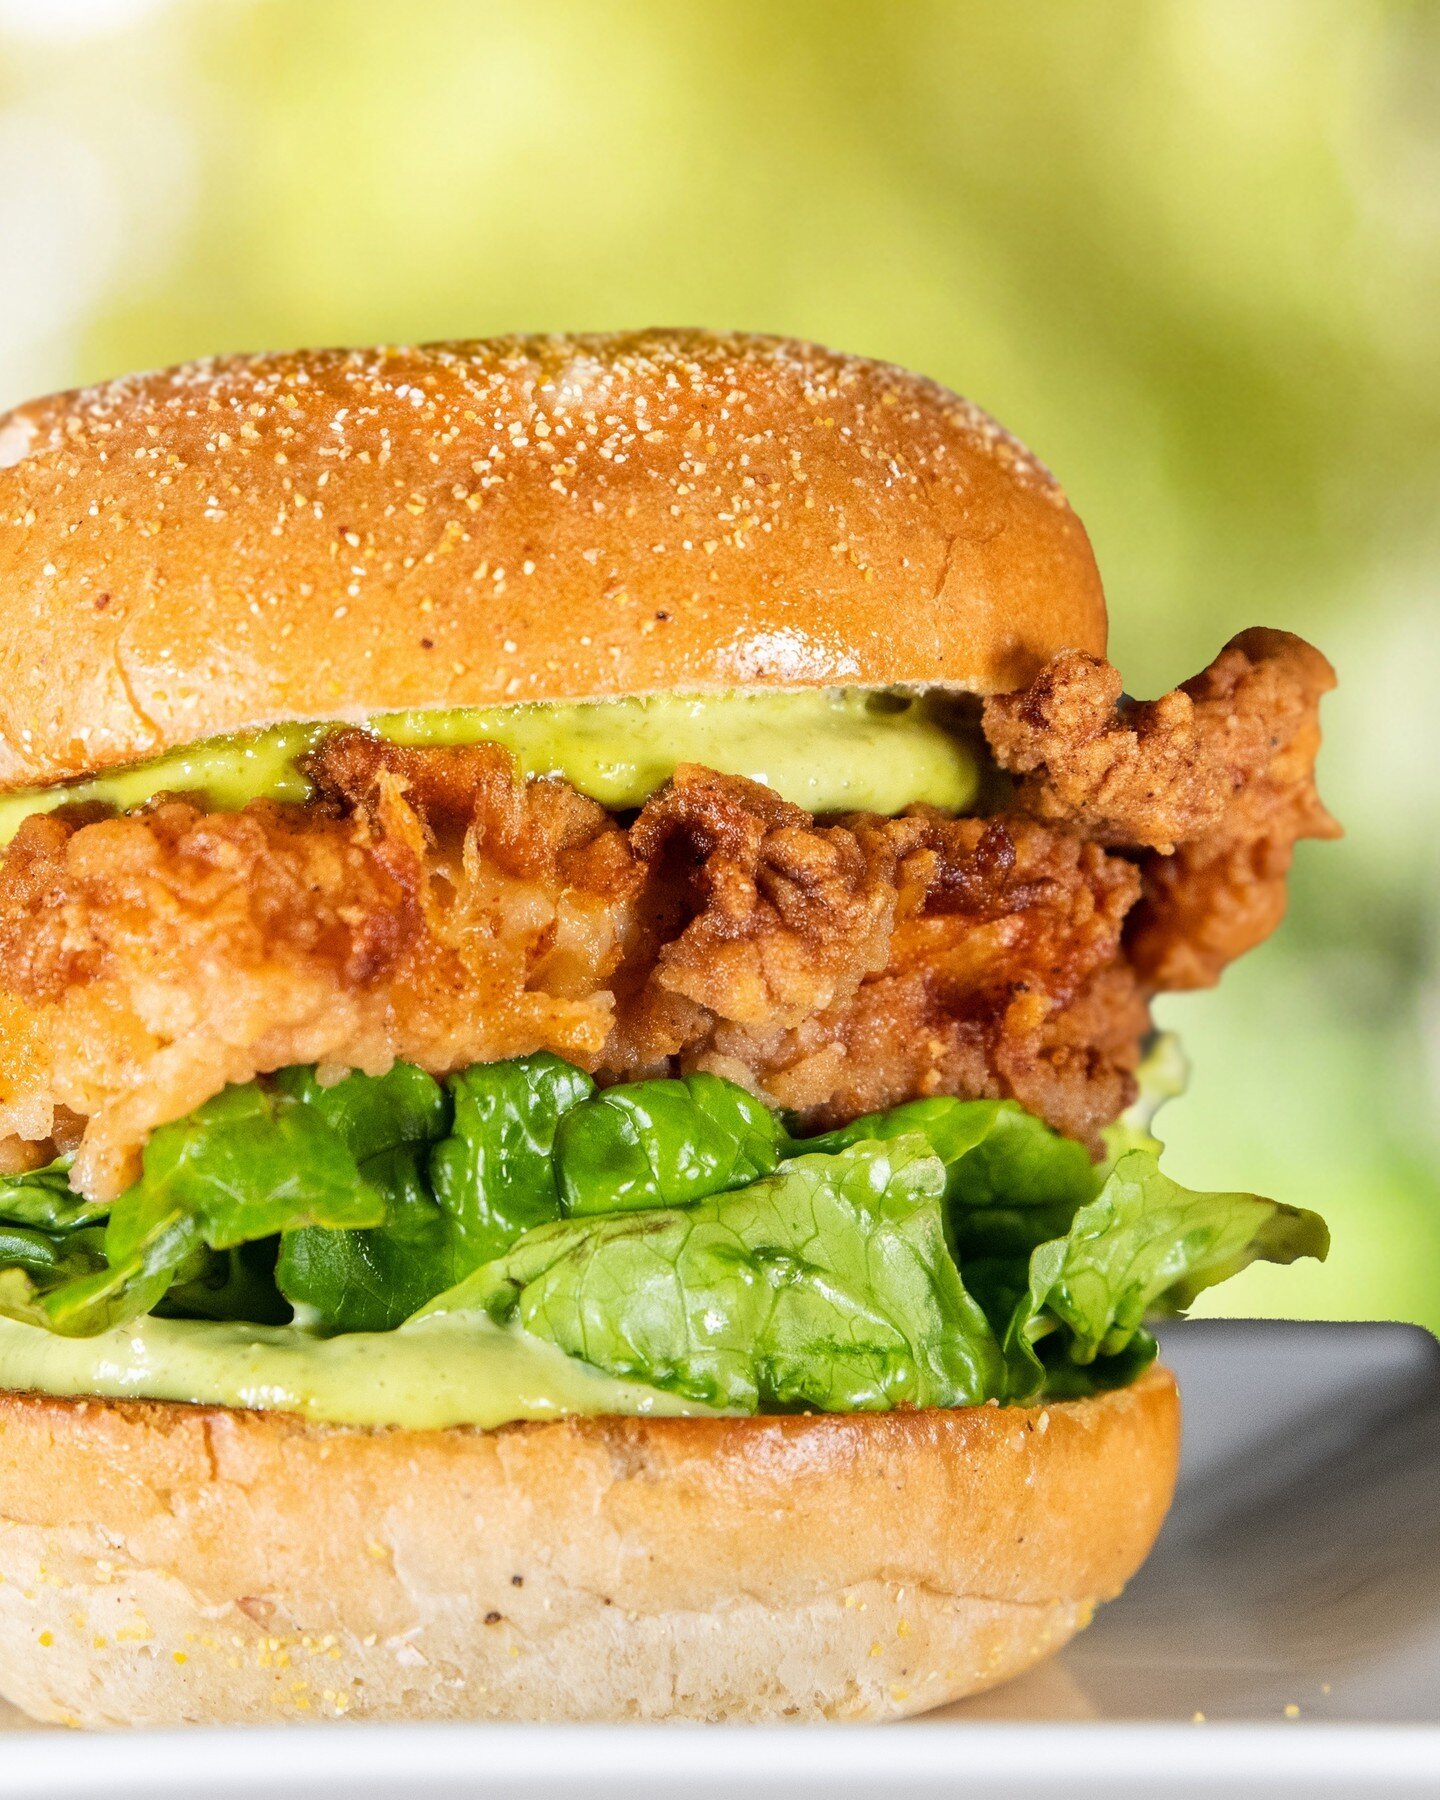 Rocketbird chickens are organic, vegetarian-fed, free-roamin&rsquo; birds that are raised without hormones or antibiotics. Each sandwich features crispy, moist and tender, perfectly seasoned breast meat on an artisanal potato bun with one of our hous